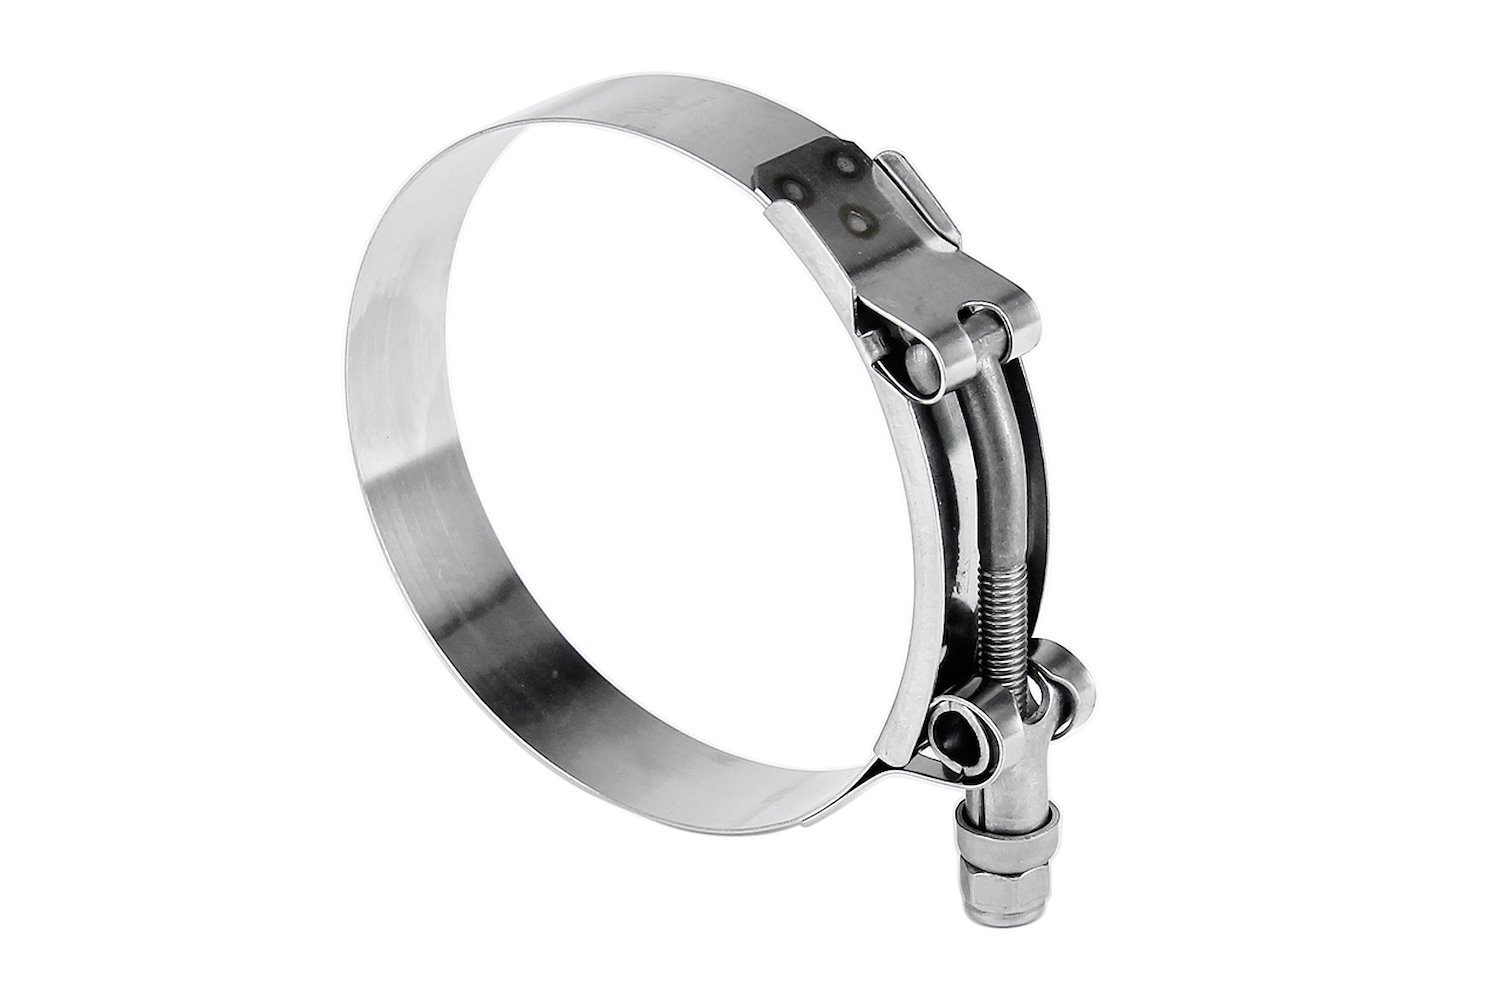 316-SSTC-114-122 100-Percent Marine Grade Stainless Steel T-Bolt Hose Clamp, Size #116, Range: 4.5 in.- 4.8 in.